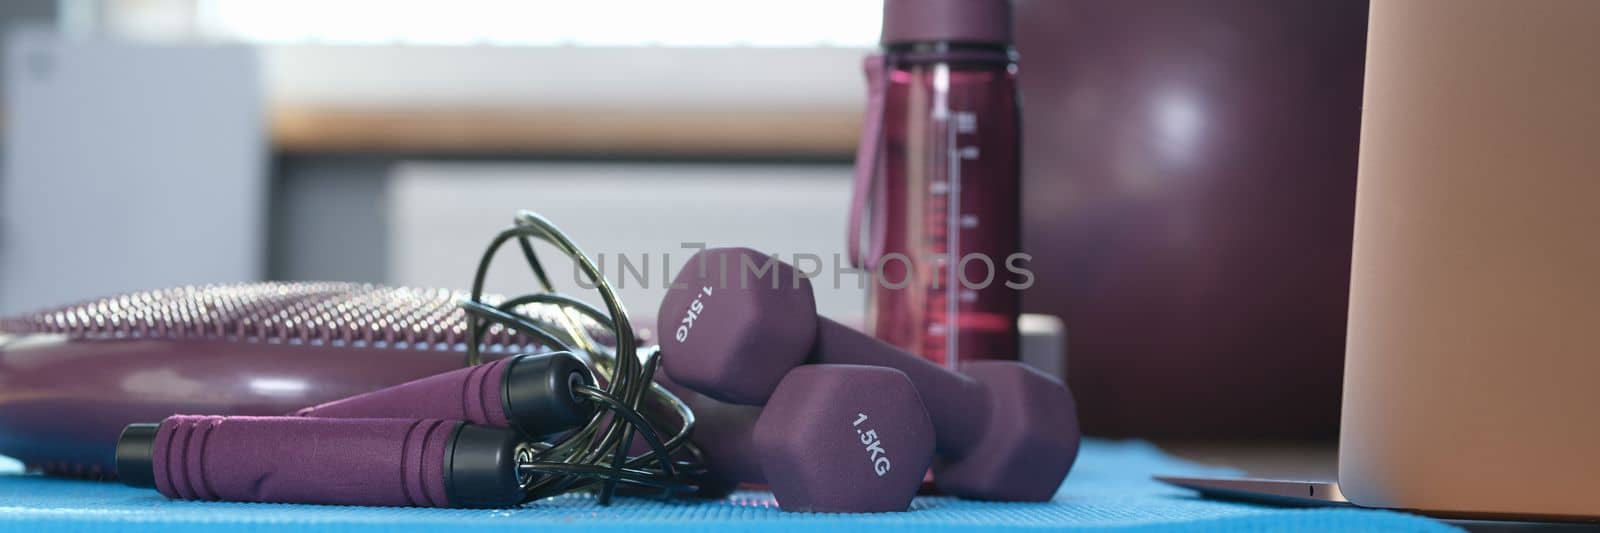 Gym equipment for training at home closeup. Fitness items for training healthy lifestyle concept